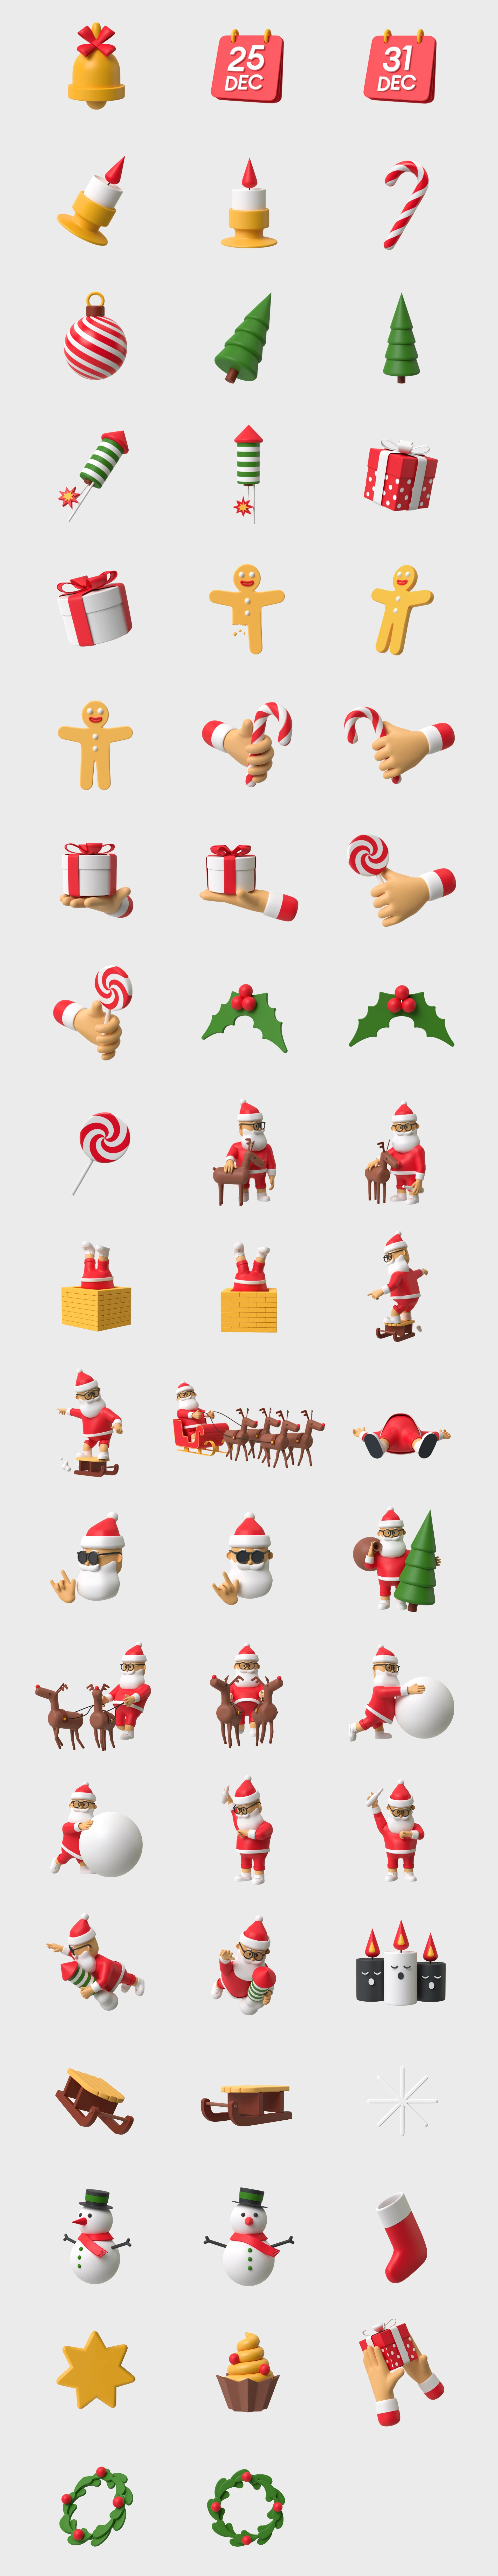 Free Christmas 3D Illustrations - Merry holiday set is here! Charismatic Santa character in different poses and cute Christmas hands gestures are ready to help with upcoming UI projects.